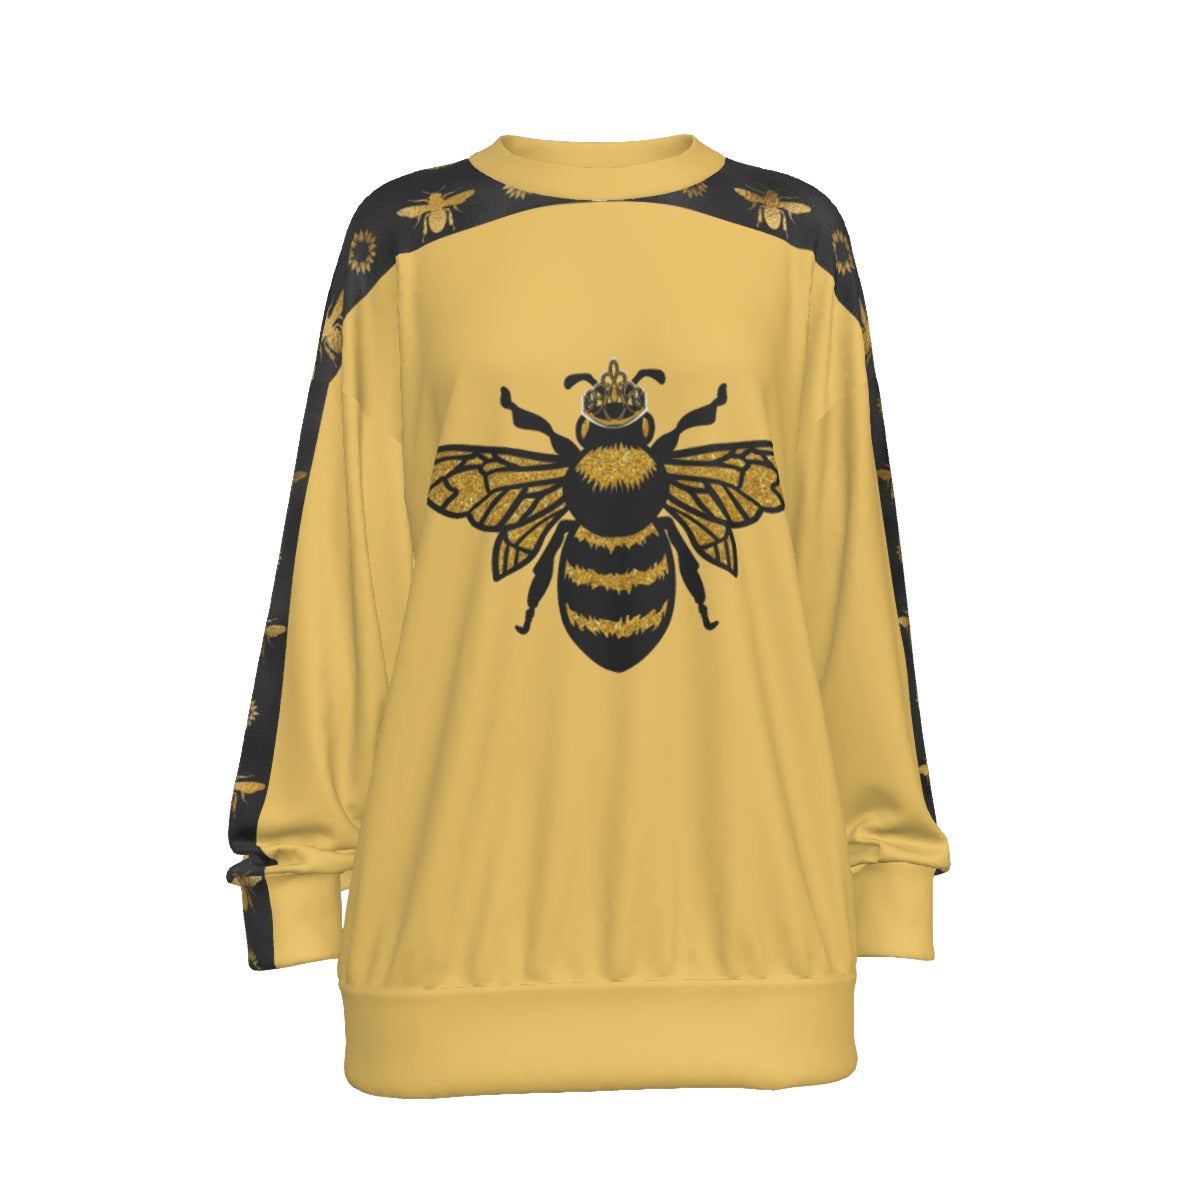 "I'm A Bee" Sweater with Bee Royalty Print down the sleeve